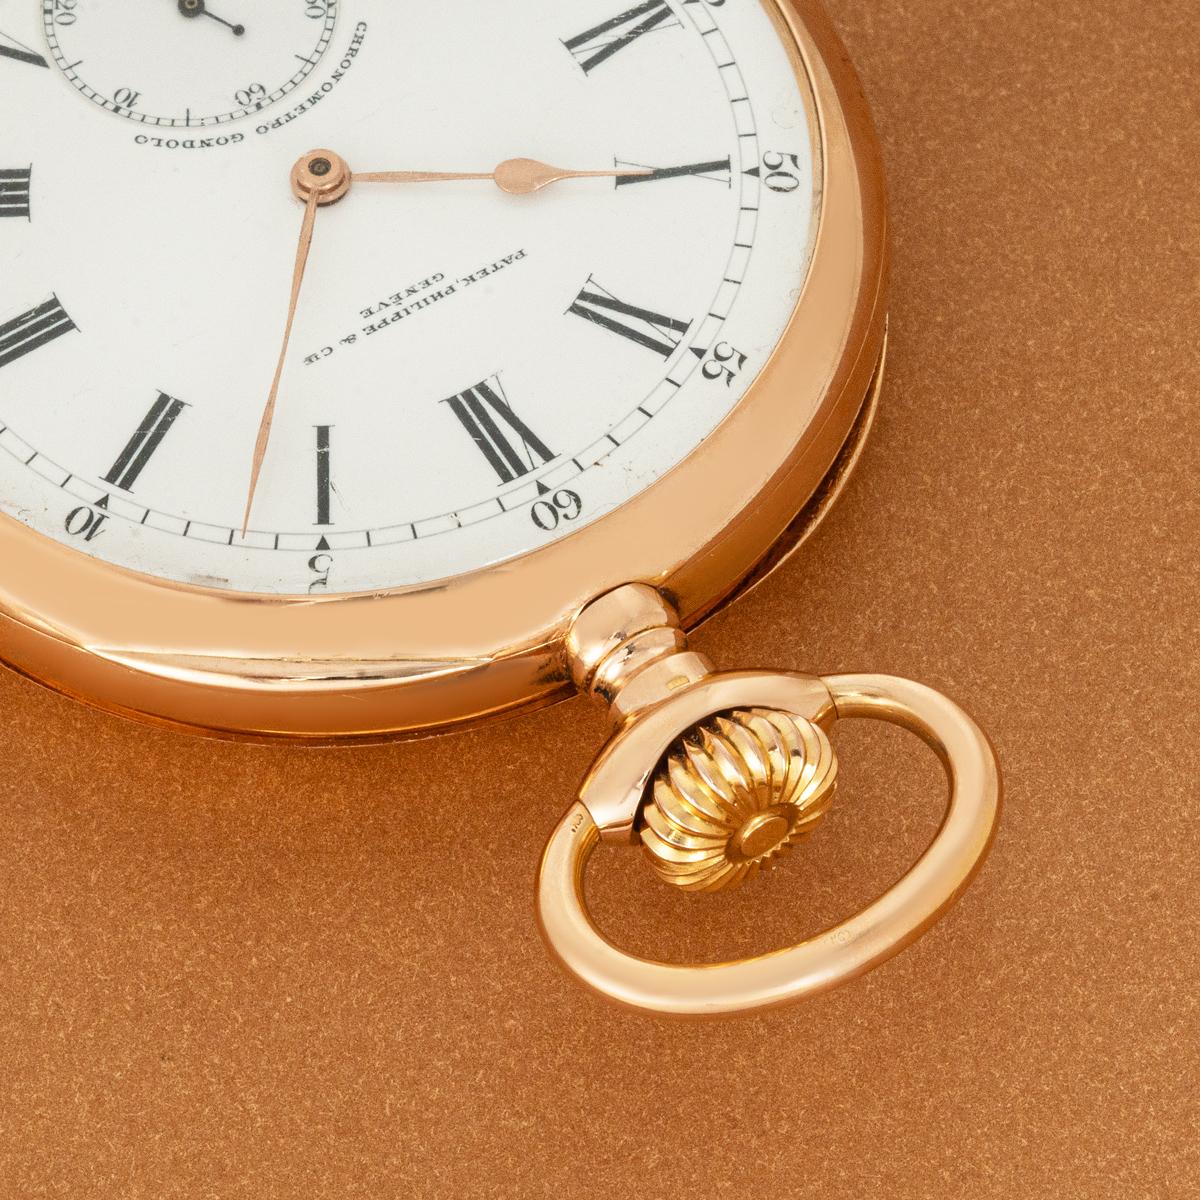 A Patek Philippe 18ct Rose Gold, Keyless Lever Gondolo Open Face Pocket Watch, C1900s.

Dial: A perfect white enamel dial with Roman numerals, outer minute track with Arabic five min intervals signed Patek Philippe & Co Genève with sub second dial